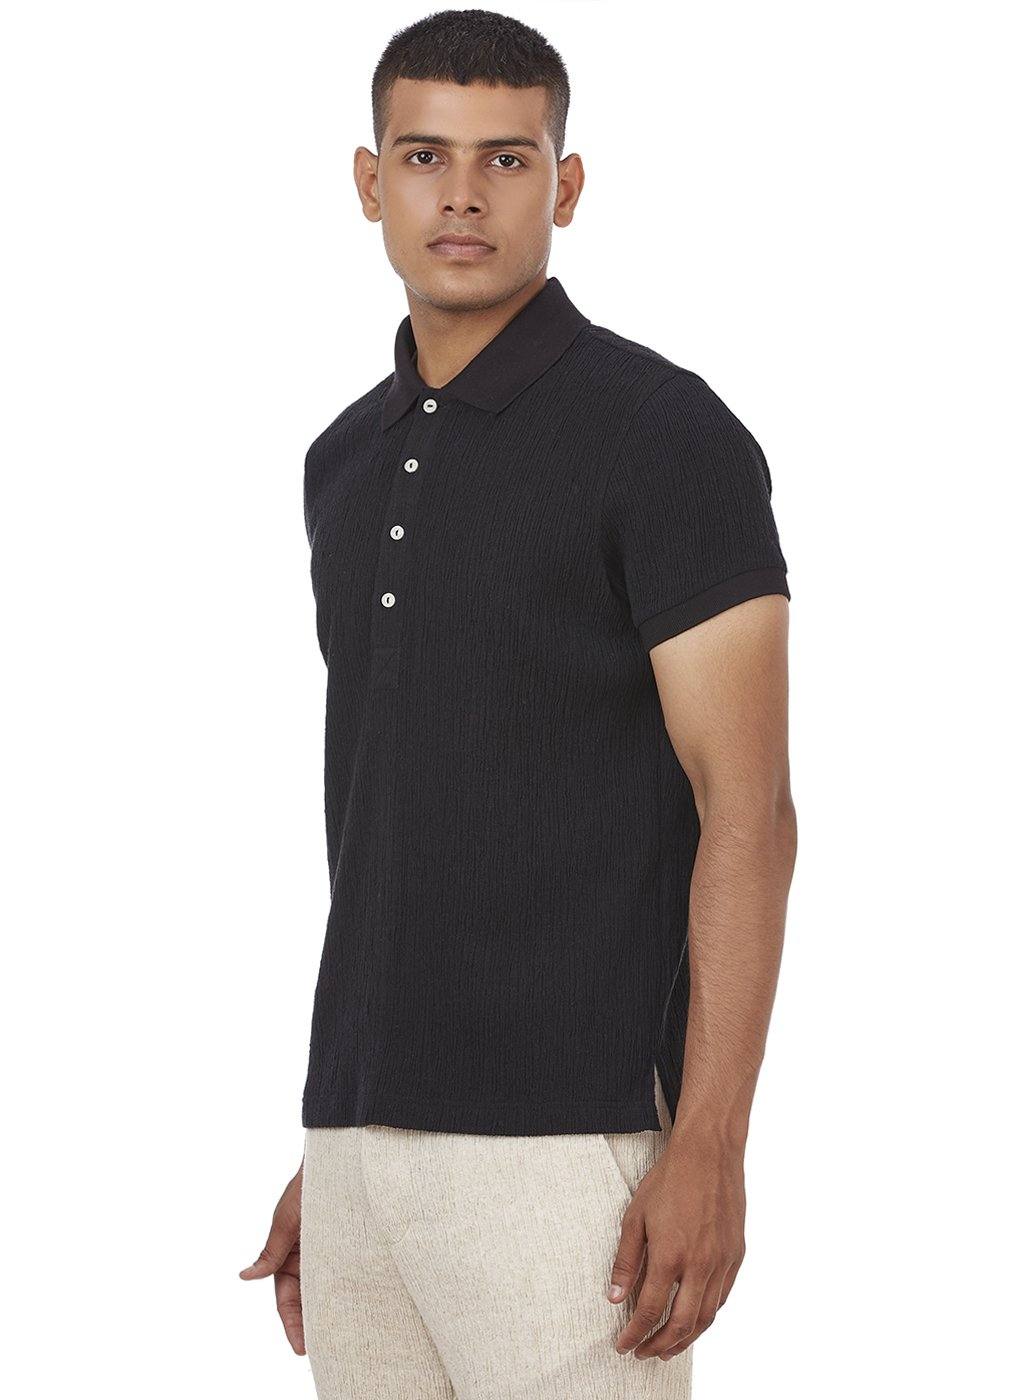 PLOVER CRINKLE POLO - Genes online store 2020